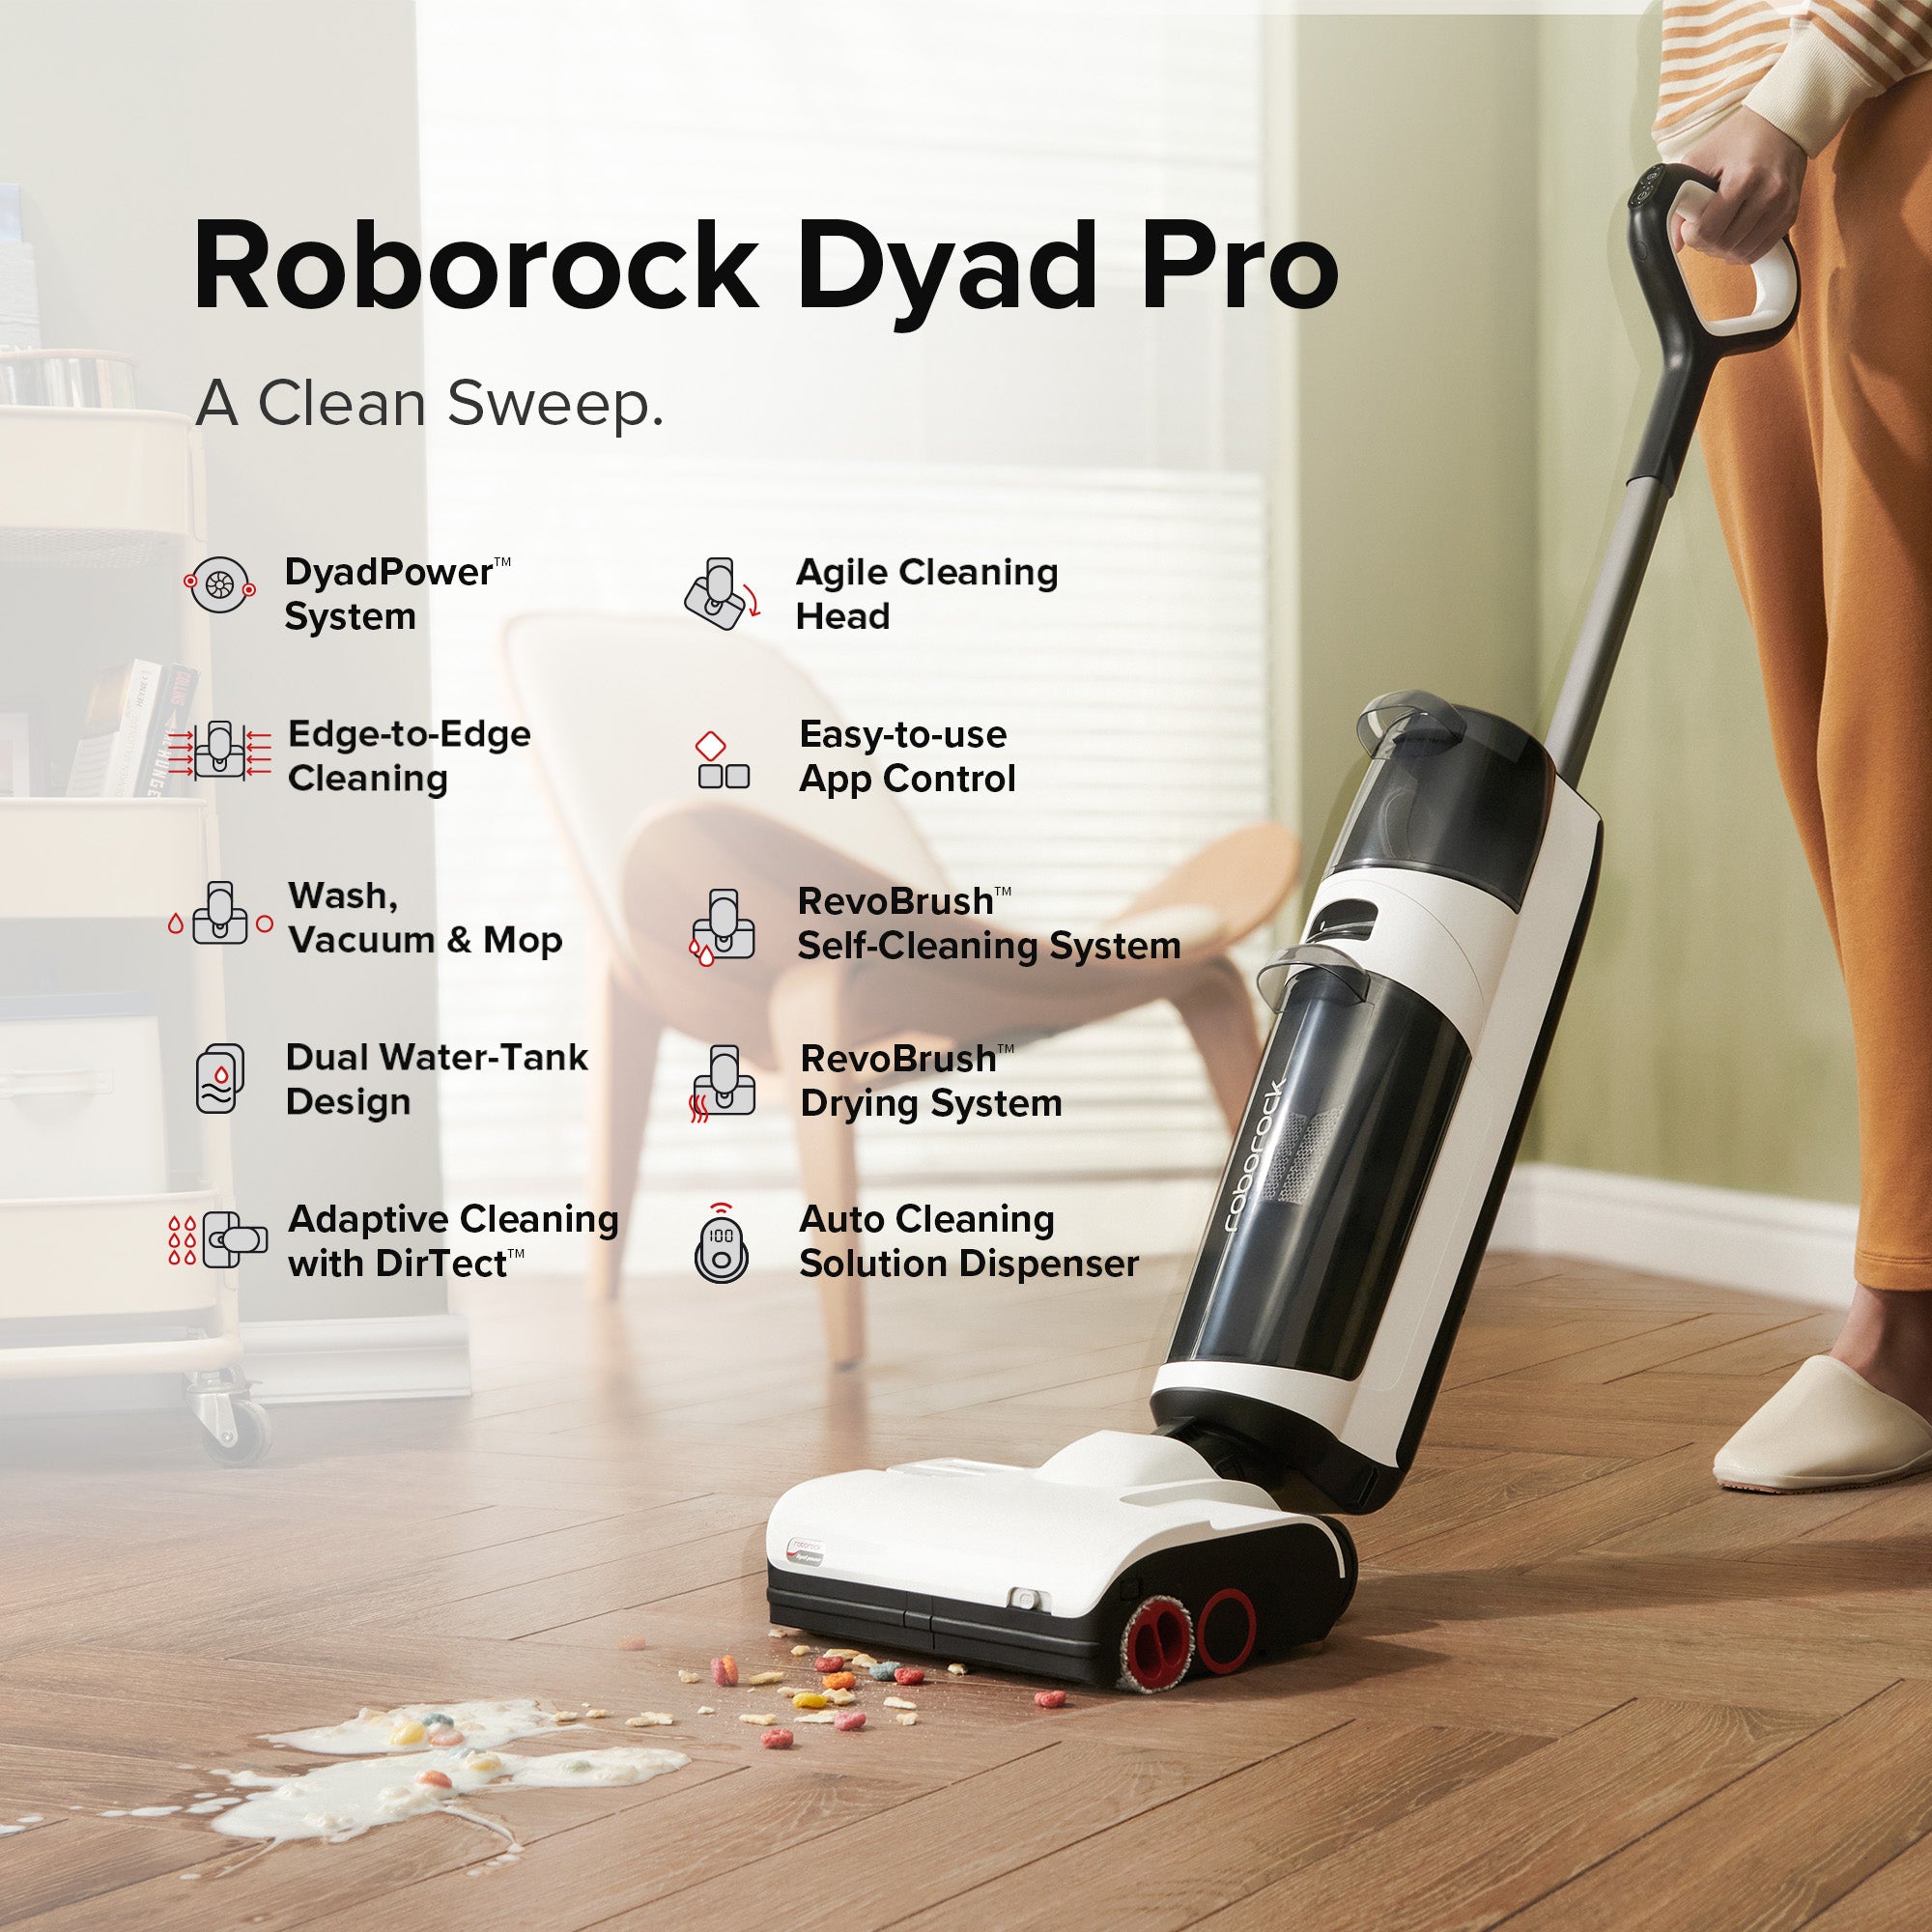 For Xiaomi Roborock and OMO Joint Sweeping Robot Cleaning Liquid S8 Pro  Ultra/S8/S8+/Q5/Q7 Series/S7 Max Ultra/S7MaxV Plus 480ml